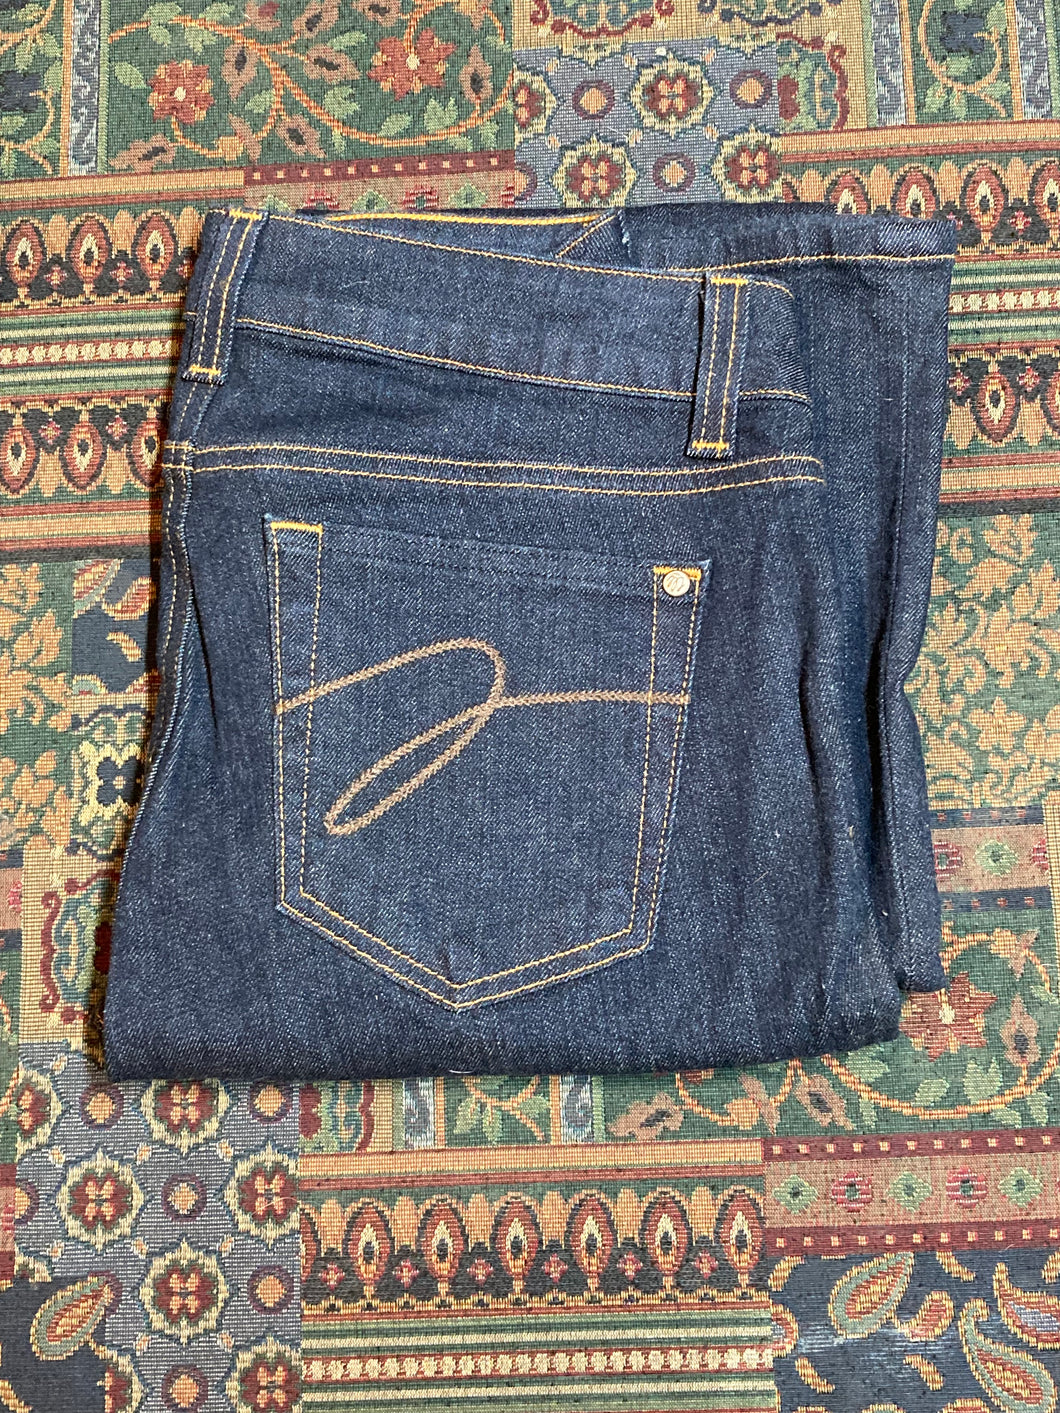 Kingspier Vintage - Miracle Body Denim Jeans - 28”x33.5”

Size 4

Low rise

Flared leg

98% cotton/ 2% Spandex

Made in USA